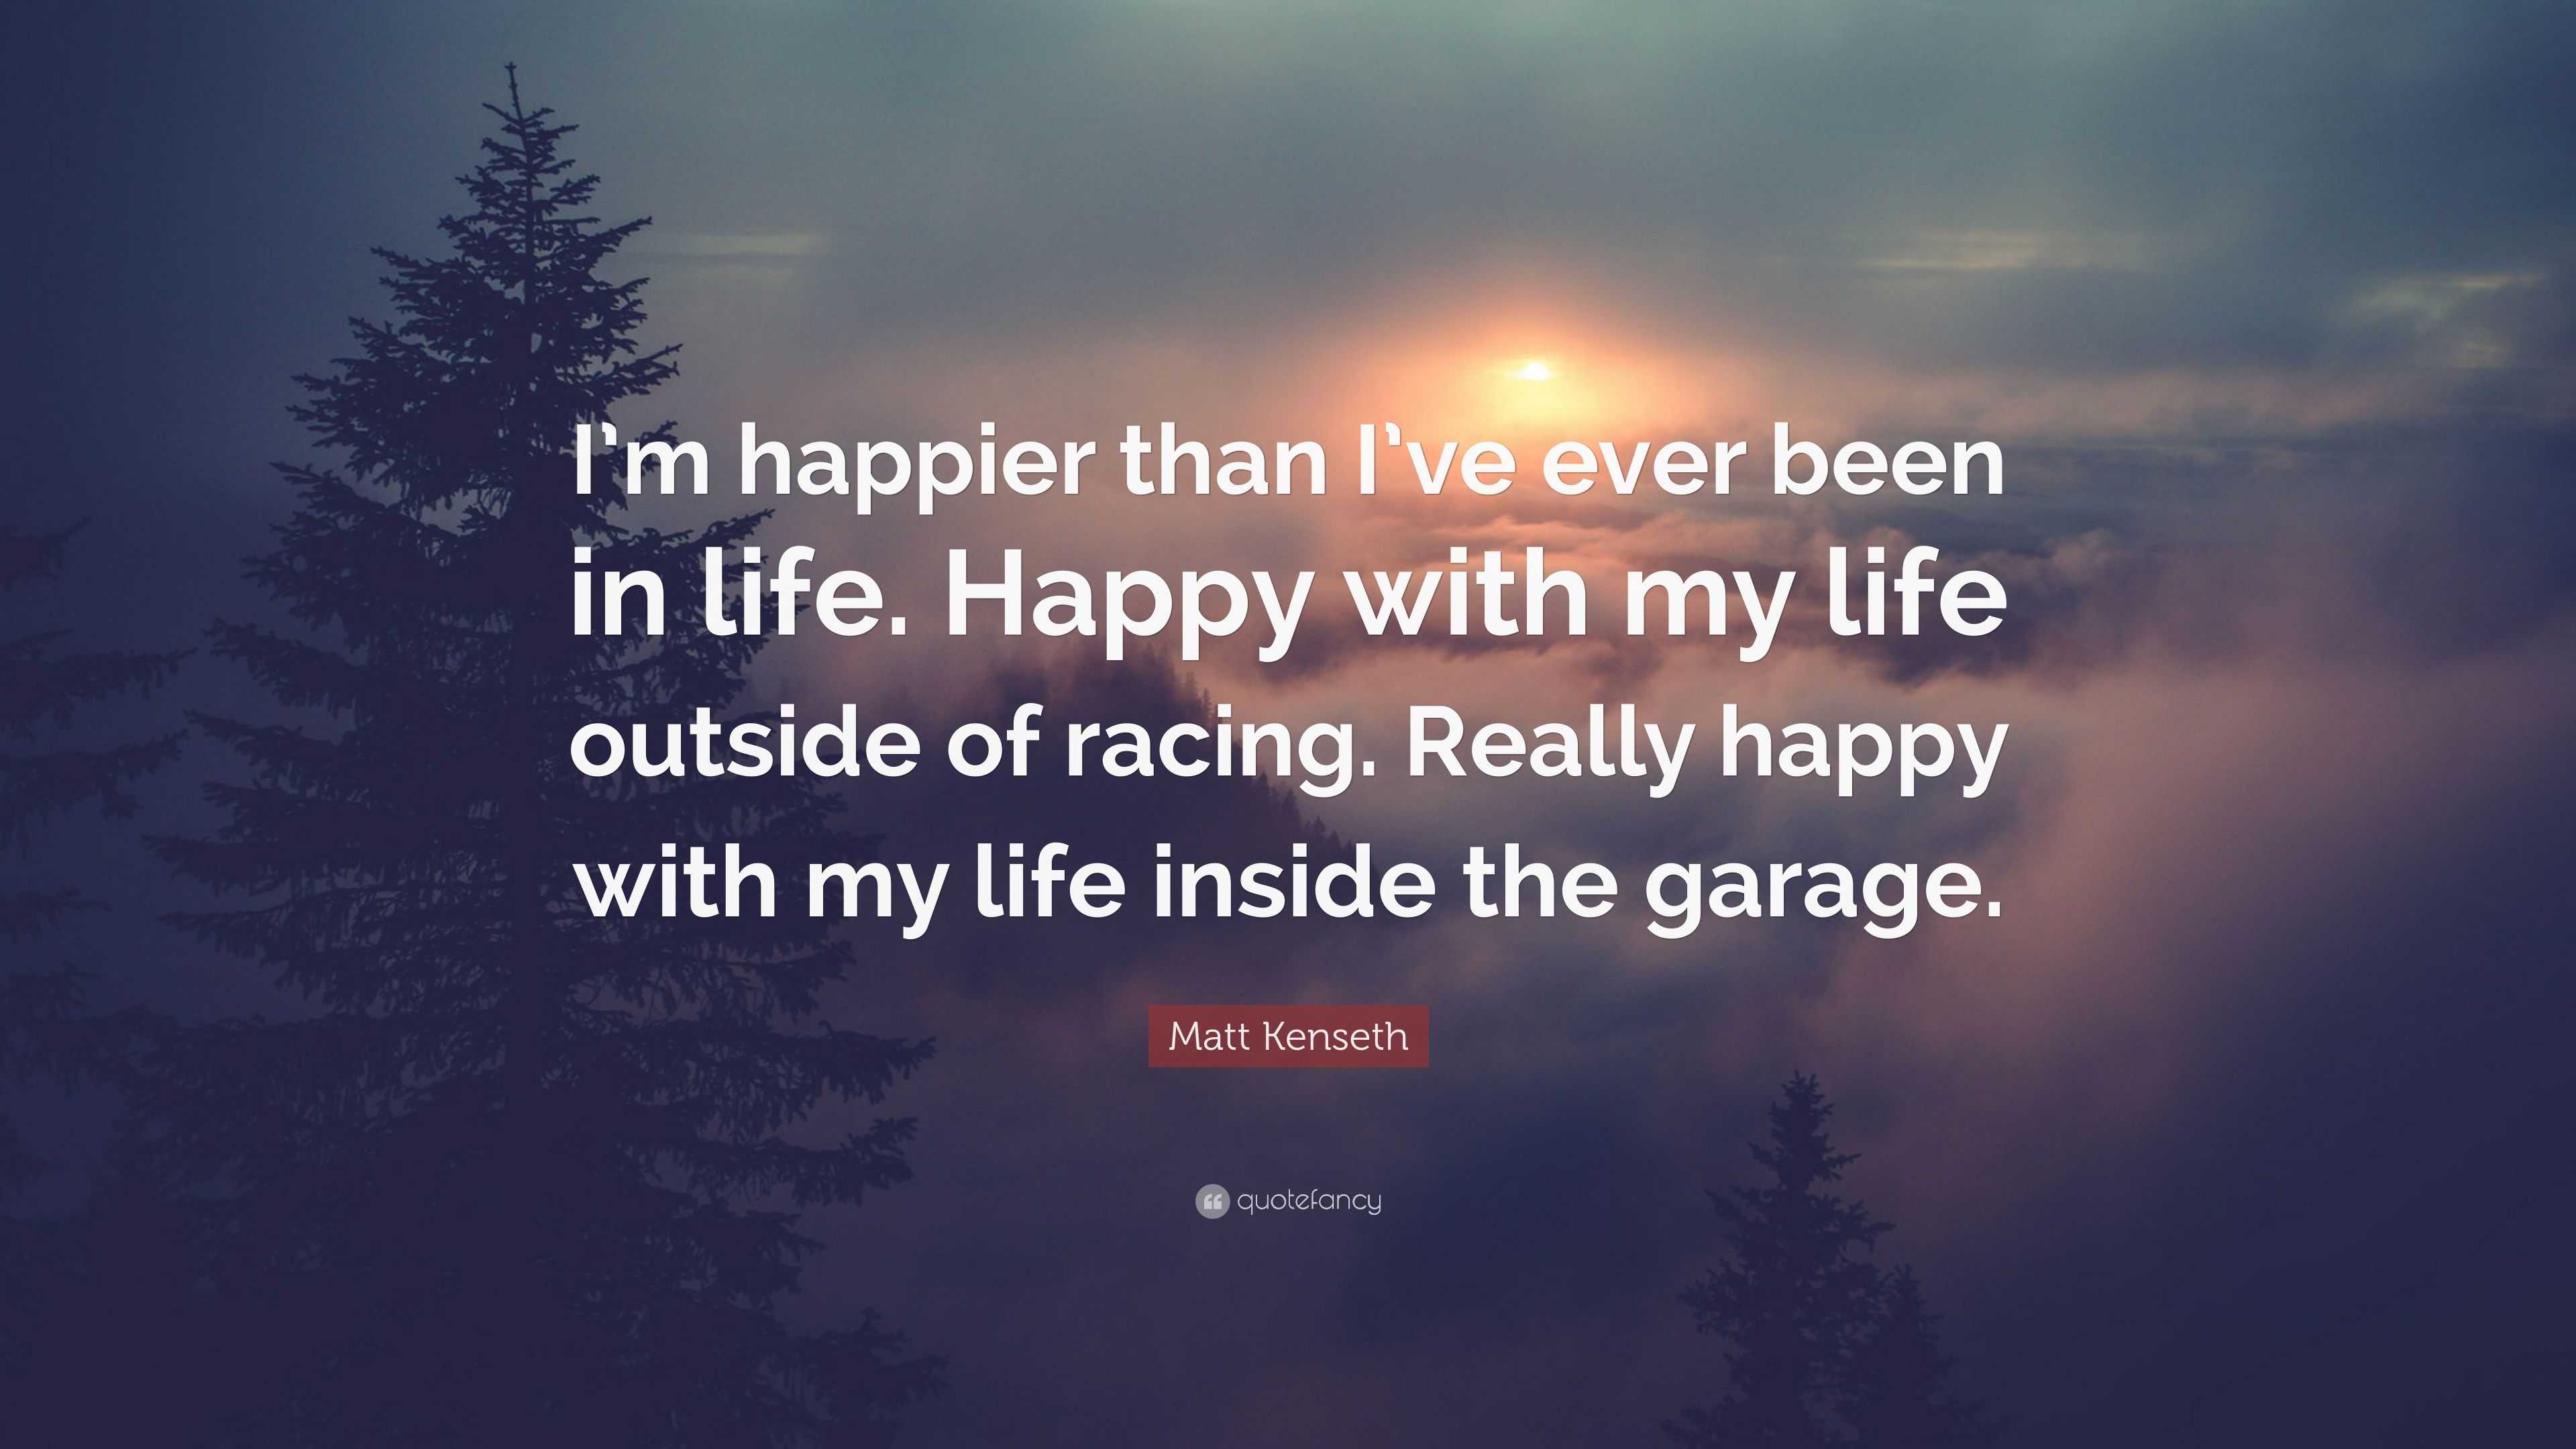 Matt Kenseth Quote “I m happier than I ve ever been in